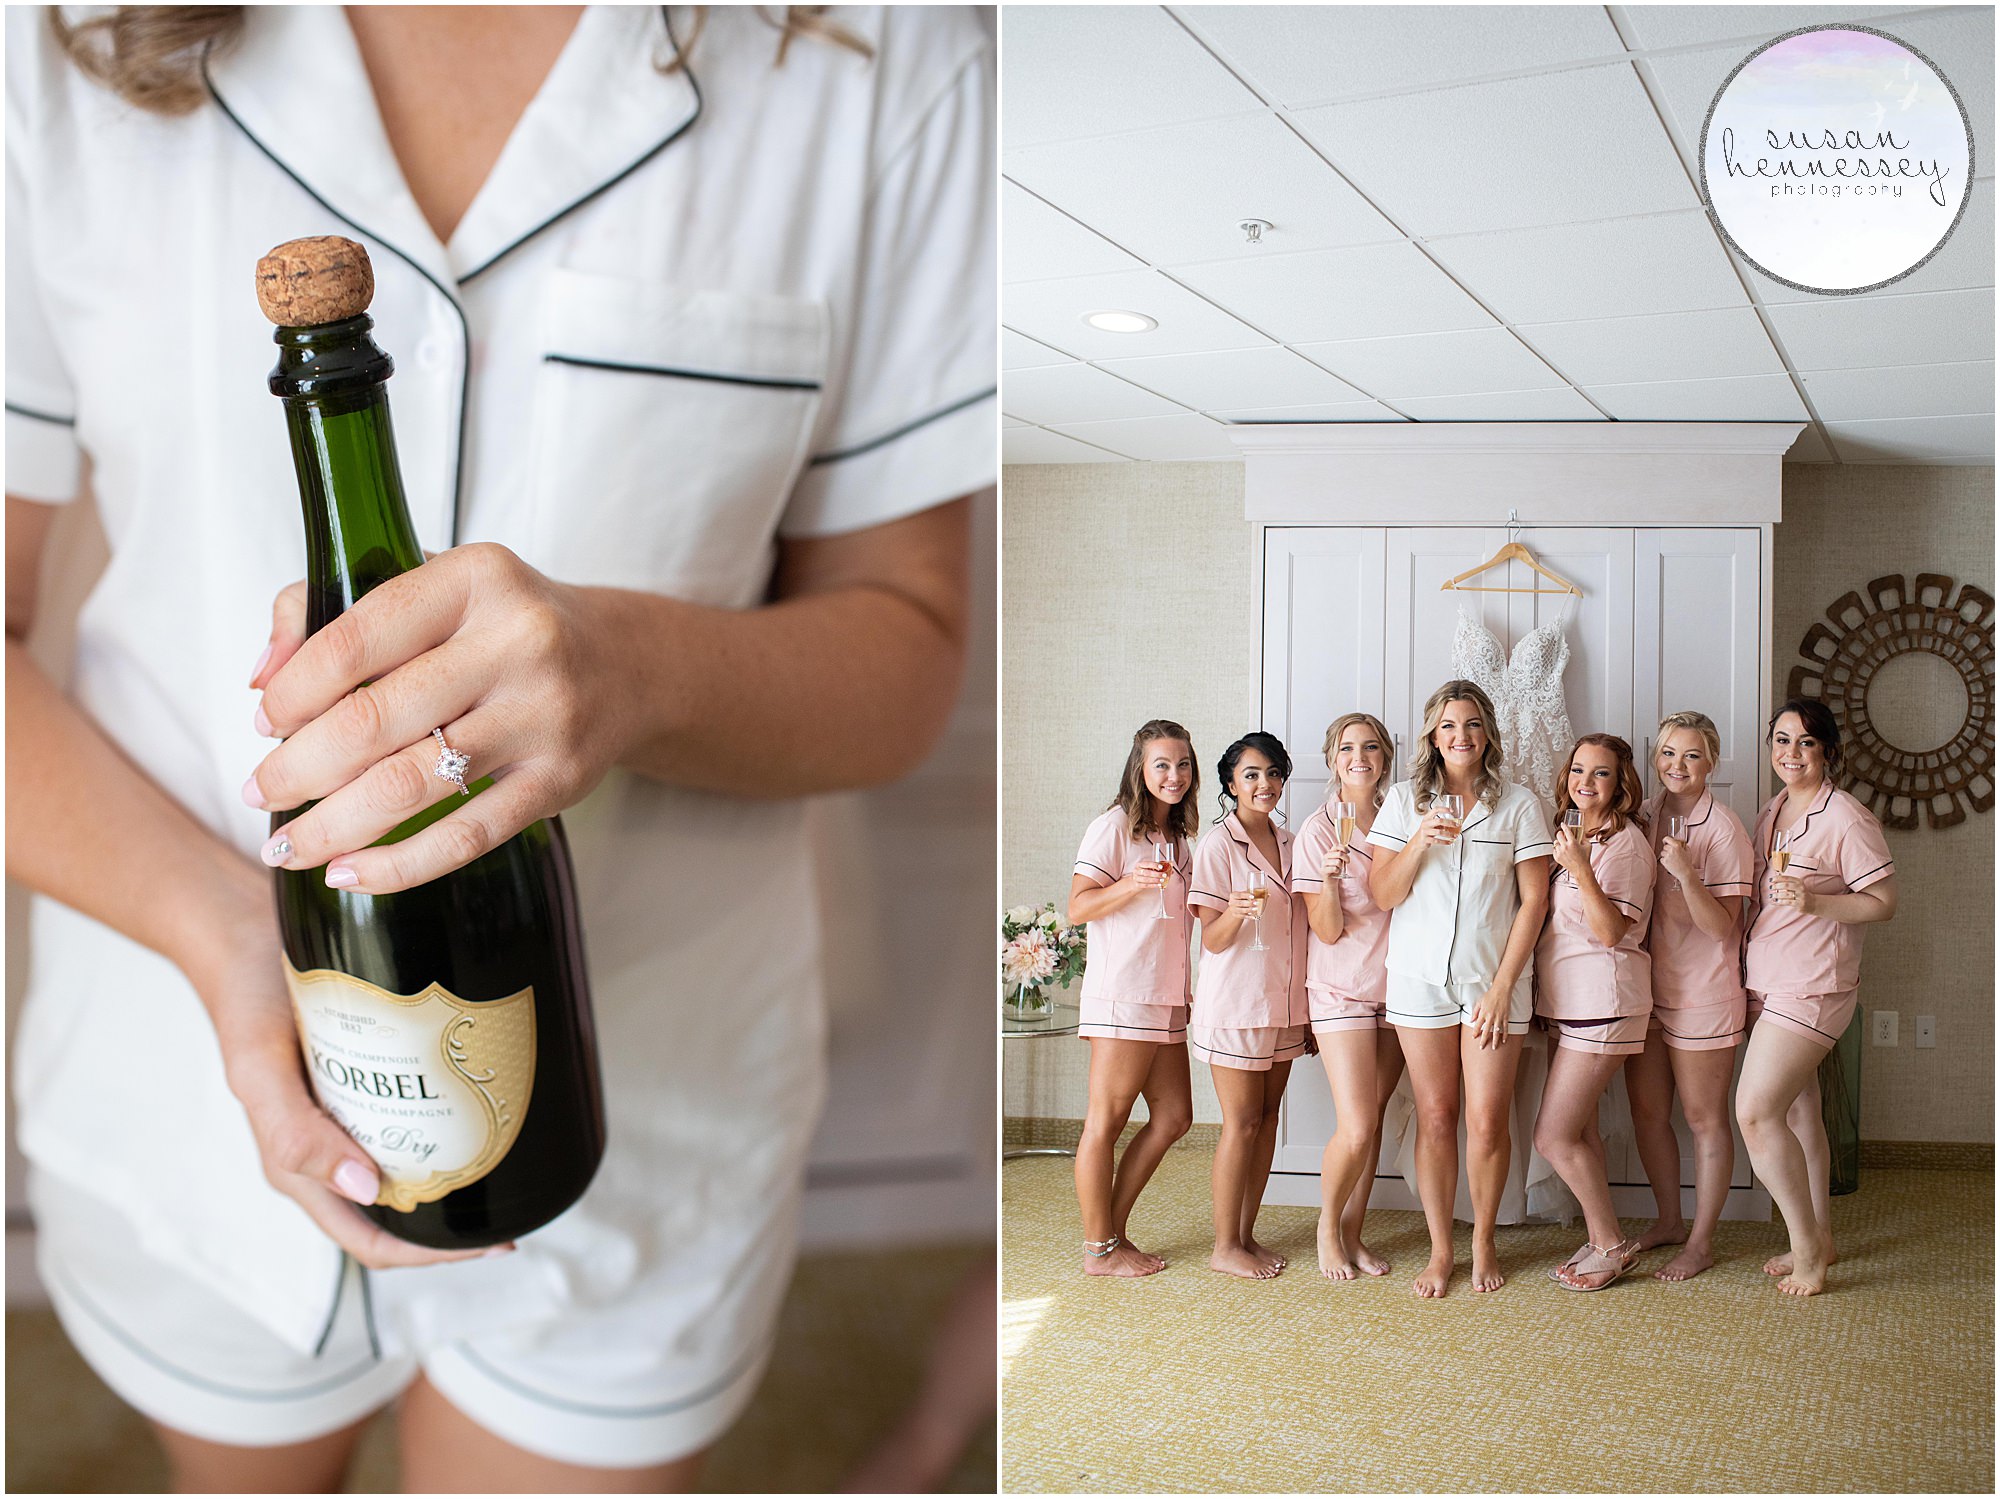 Bride and bridesmaids drink champagne on wedding day.